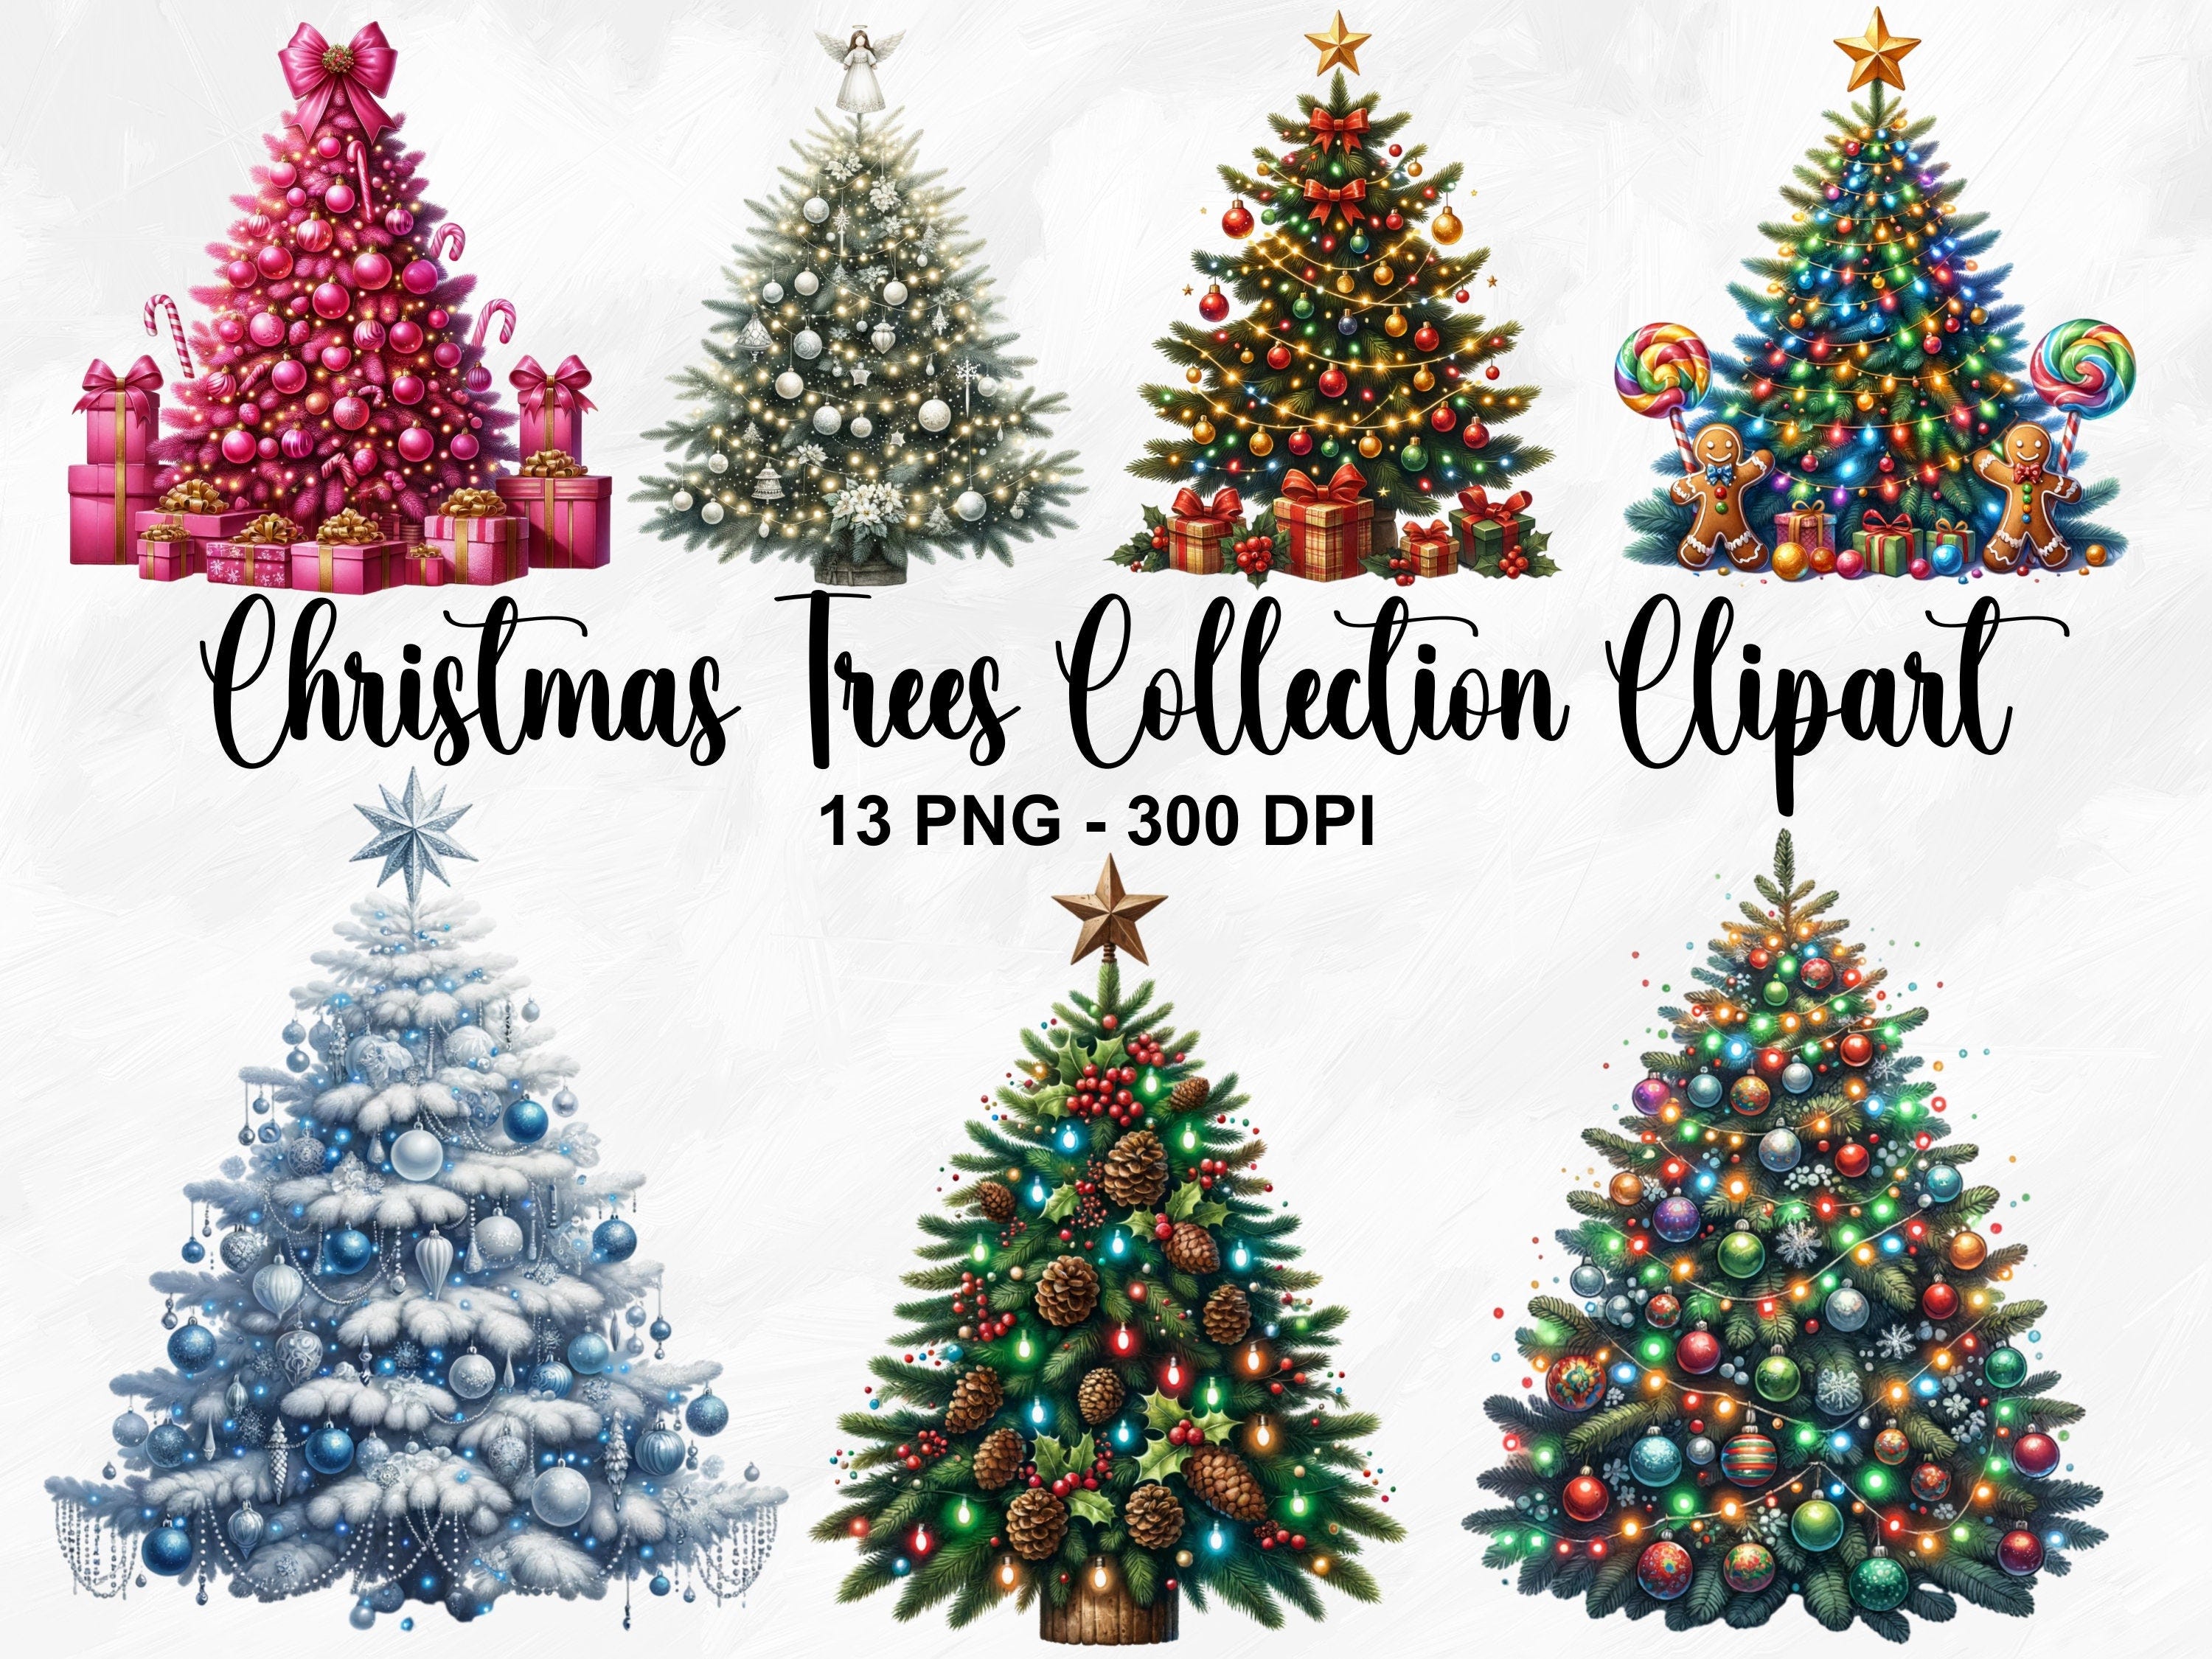 Watercolor Christmas Trees Collection Clipart, 13 PNG Christmas Tree Clipart, Christmas Illustrations, Festive Images, Commercial Use